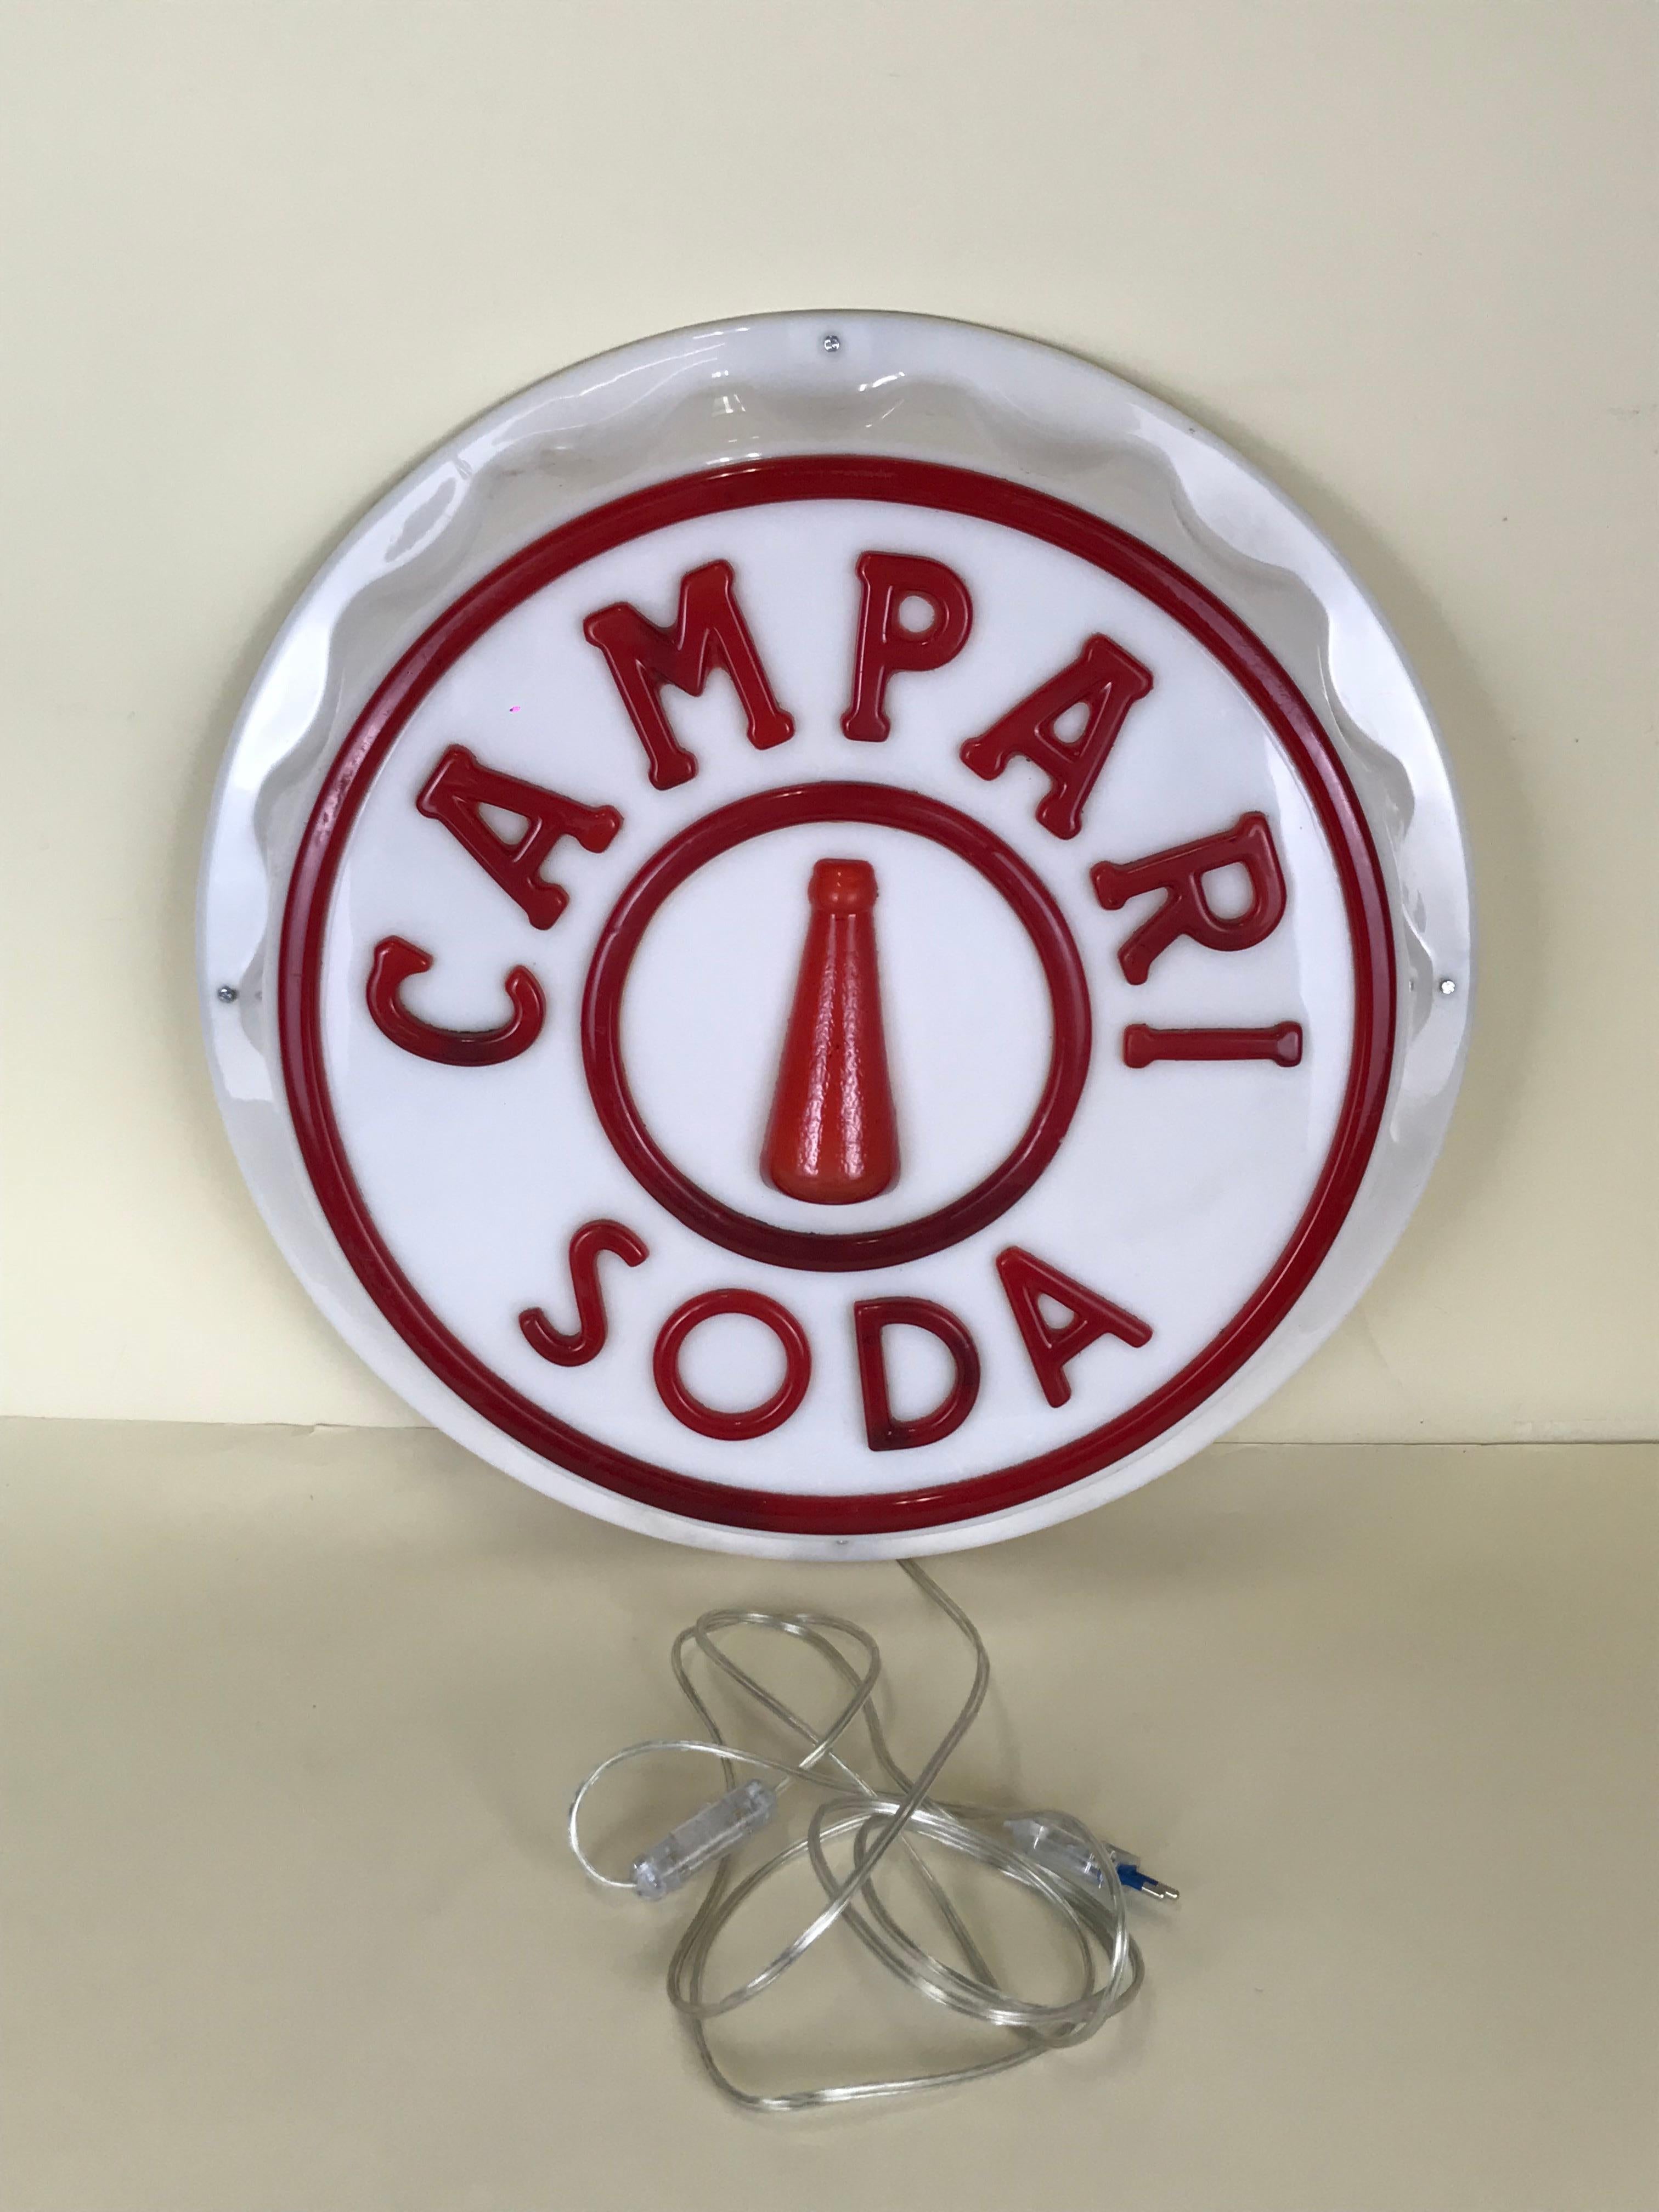 Campari soda illuminated plug shaped sign with relief letters produced in Italy in the 1950s. This very rare illuminated sign it was displayed in a selected numbers of Italian bar.

The back of the sign is not original: is now covered in wood